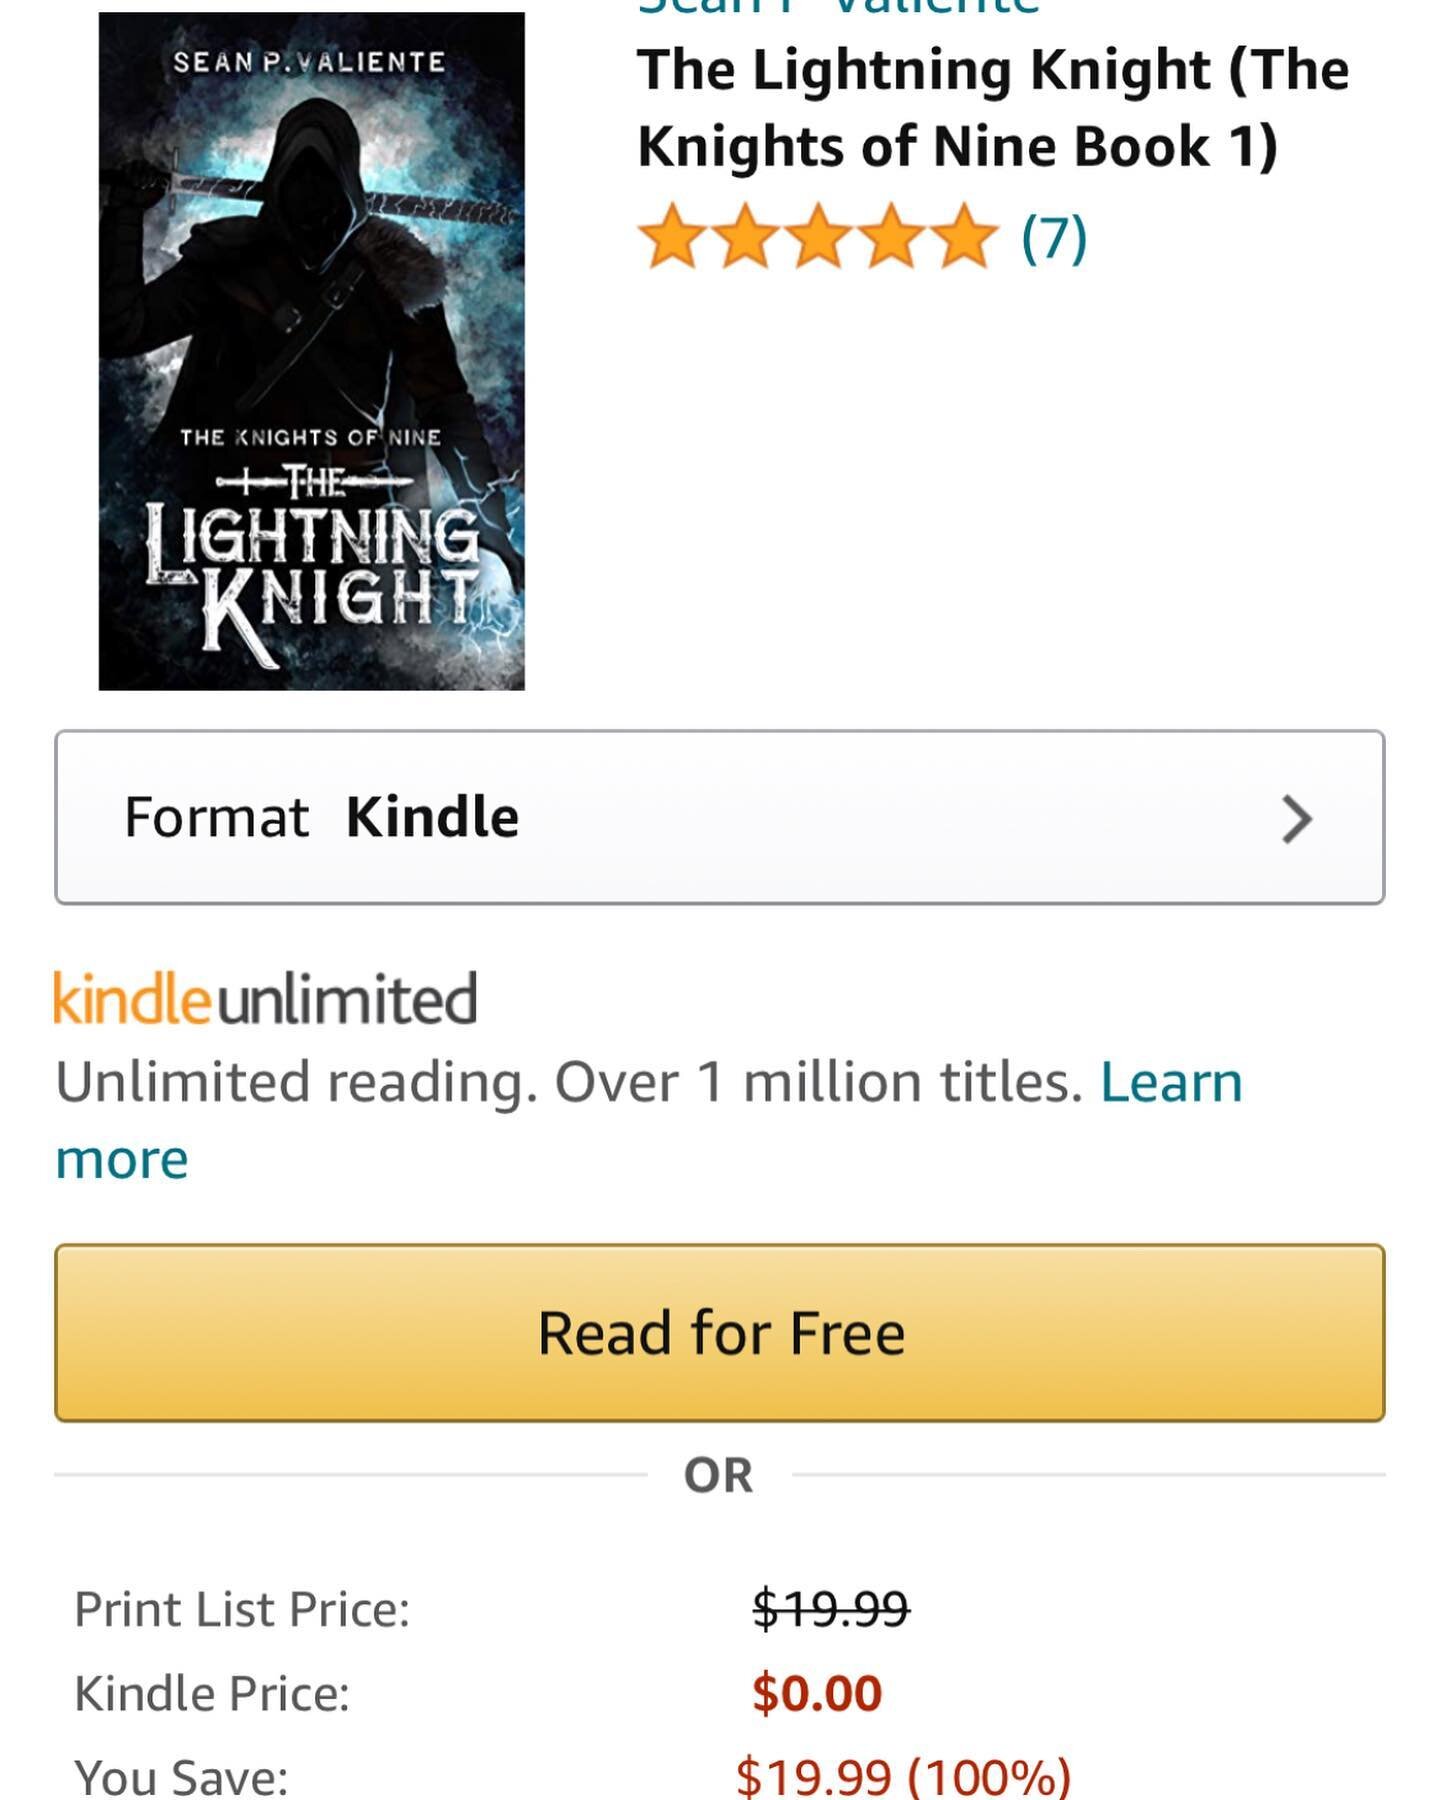 #TheLightningKnight is free on kindle for a limited time! Get your download today and follow Oliver Quartermaine on a classic fantasy adventure filled with #magic #dragons #swords #teenromance and twists and turns that will keep you guessing. 
#kindl